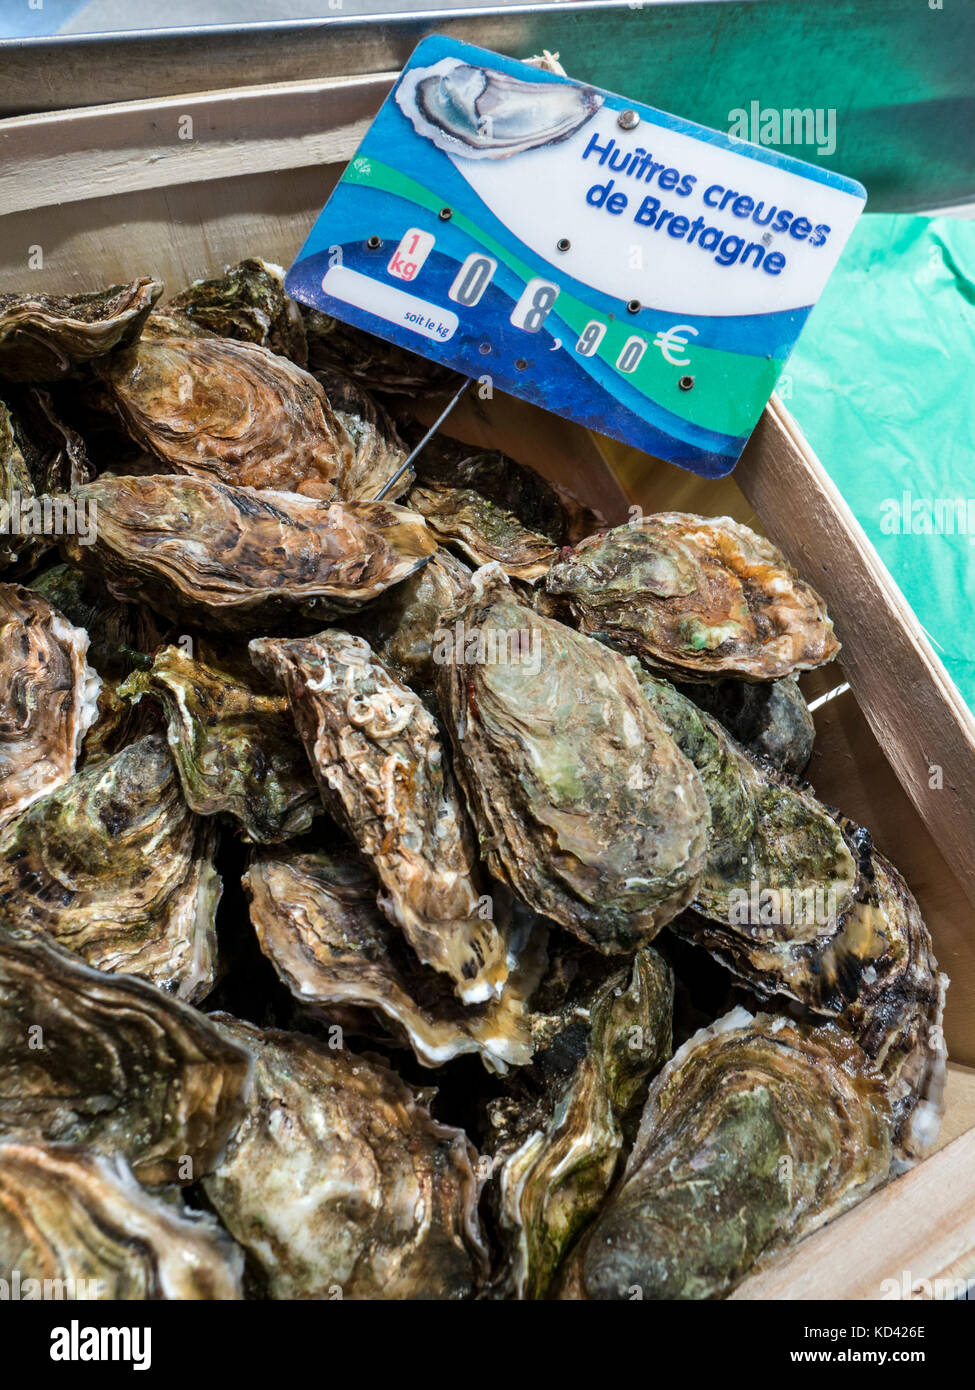 Huitres Creuses de Bretagne ‘Oysters from Brittany’ in rustic wooden crate, with euro price label Fish market Brittany France Stock Photo